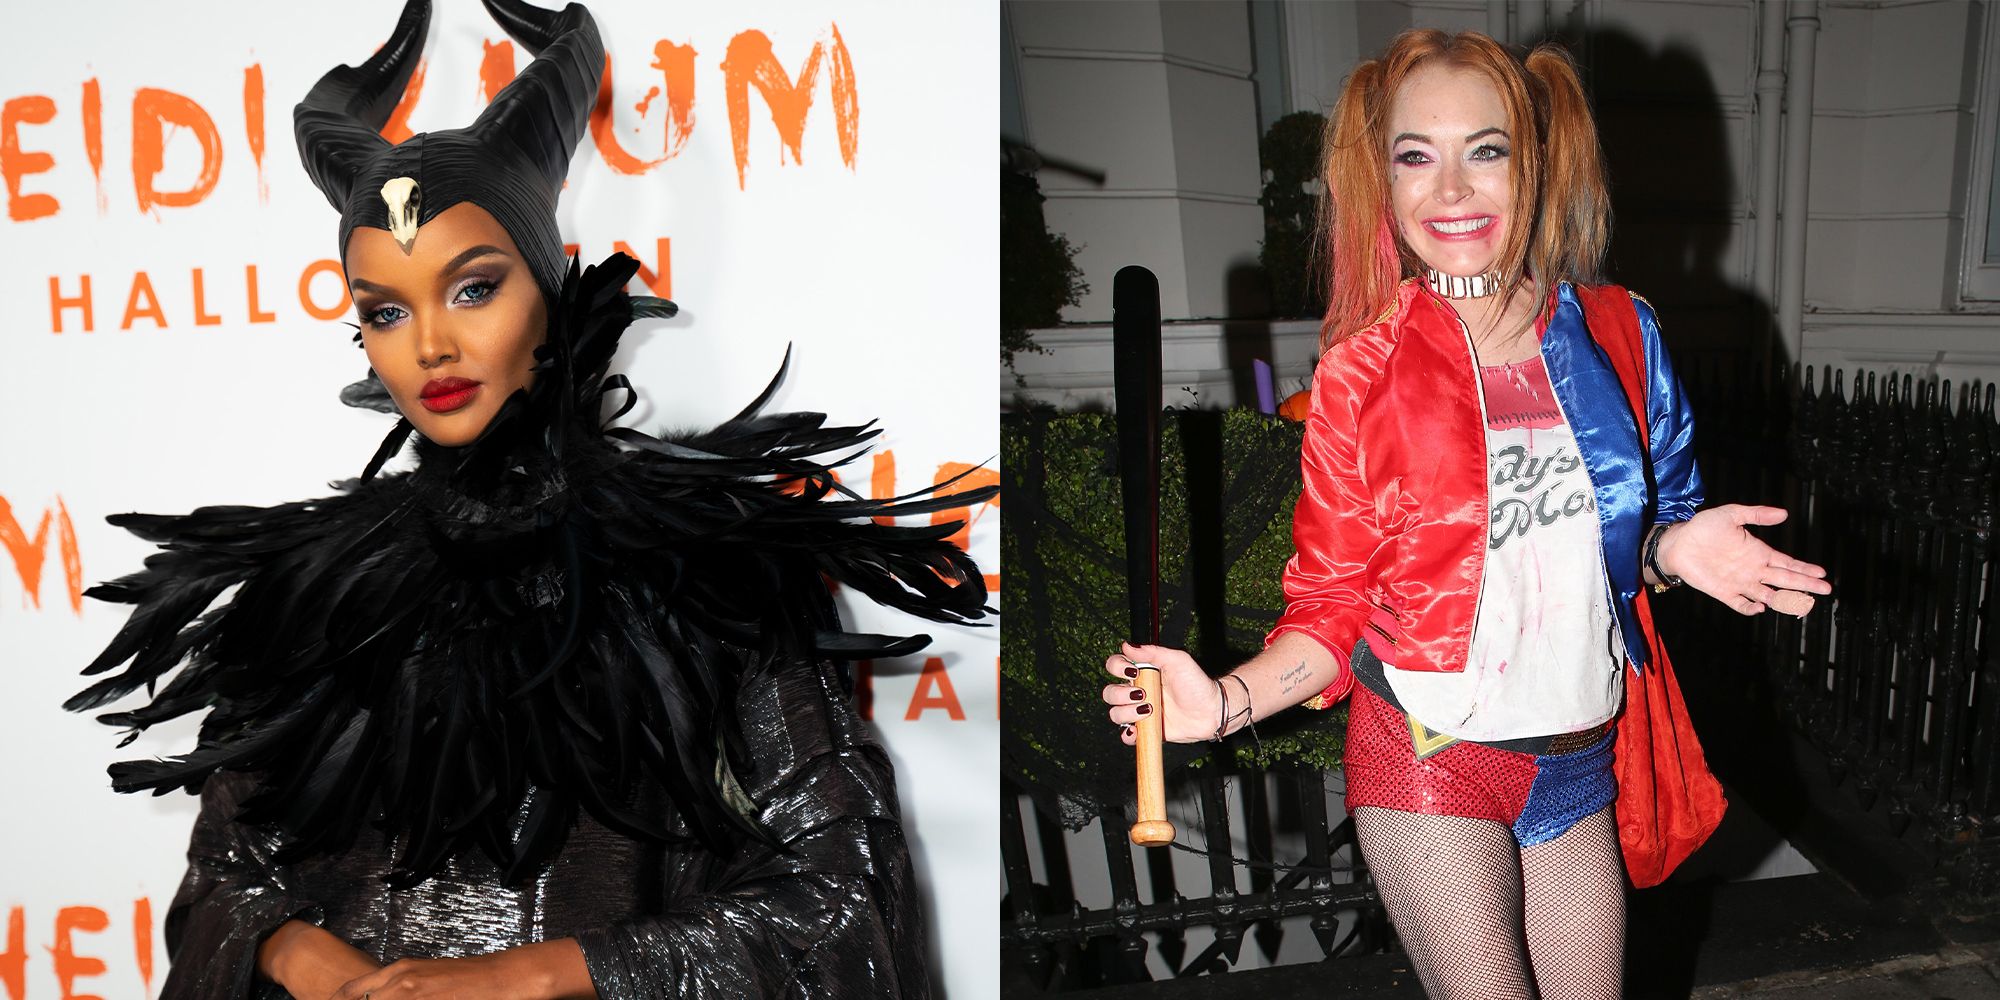 20 Of The Best Costume Ideas Inspired By Celebrity Couples | HuffPost Life